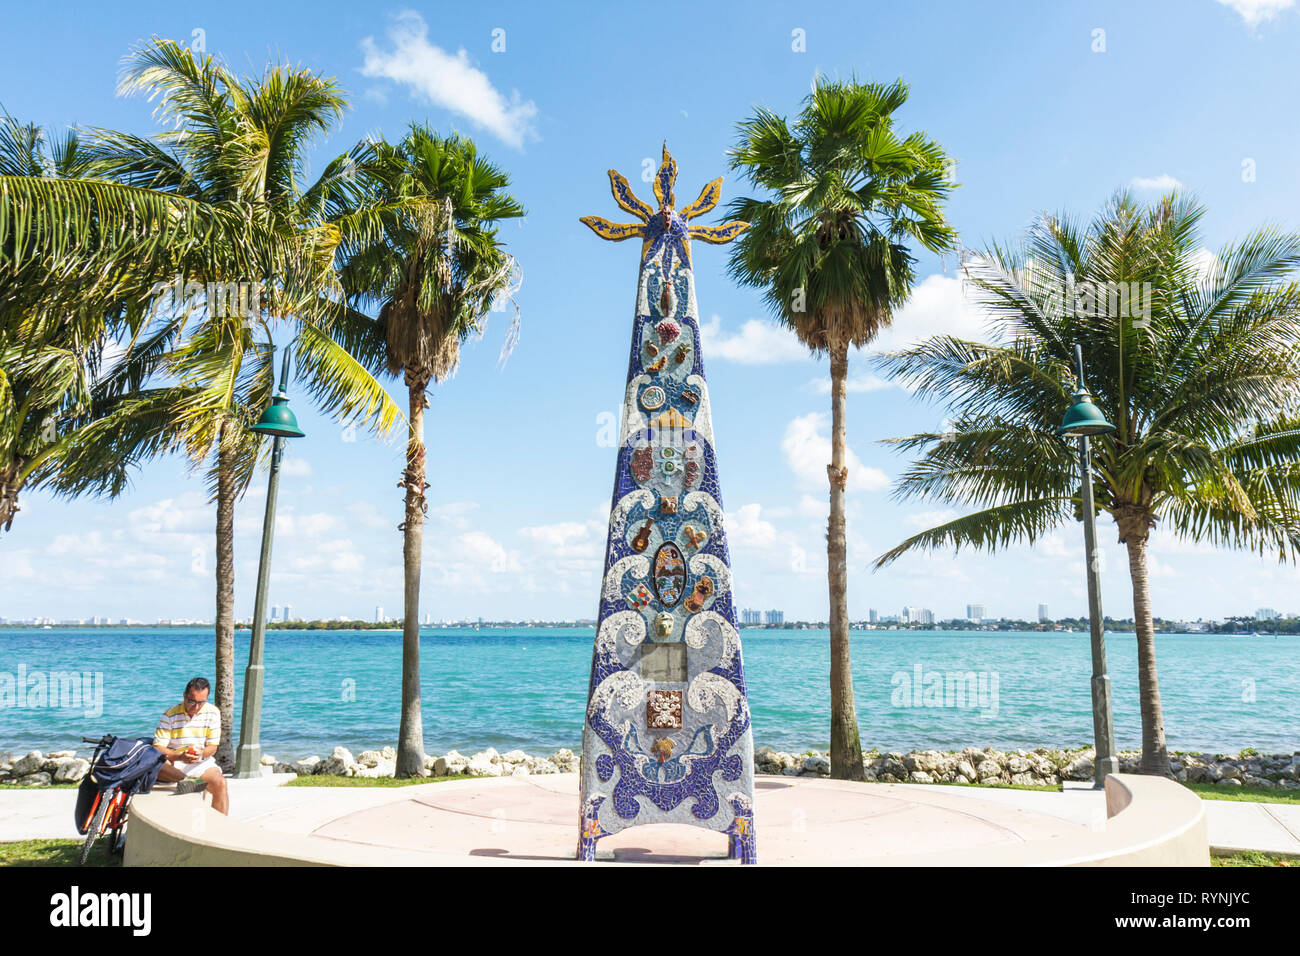 Miami Florida,Marg,Road,aret Pace Park,Biscayne Bay,Palm Trees,urban park,mosaic,art throne,art in public places,waterfront,palm trees,man men male,cy Stock Photo